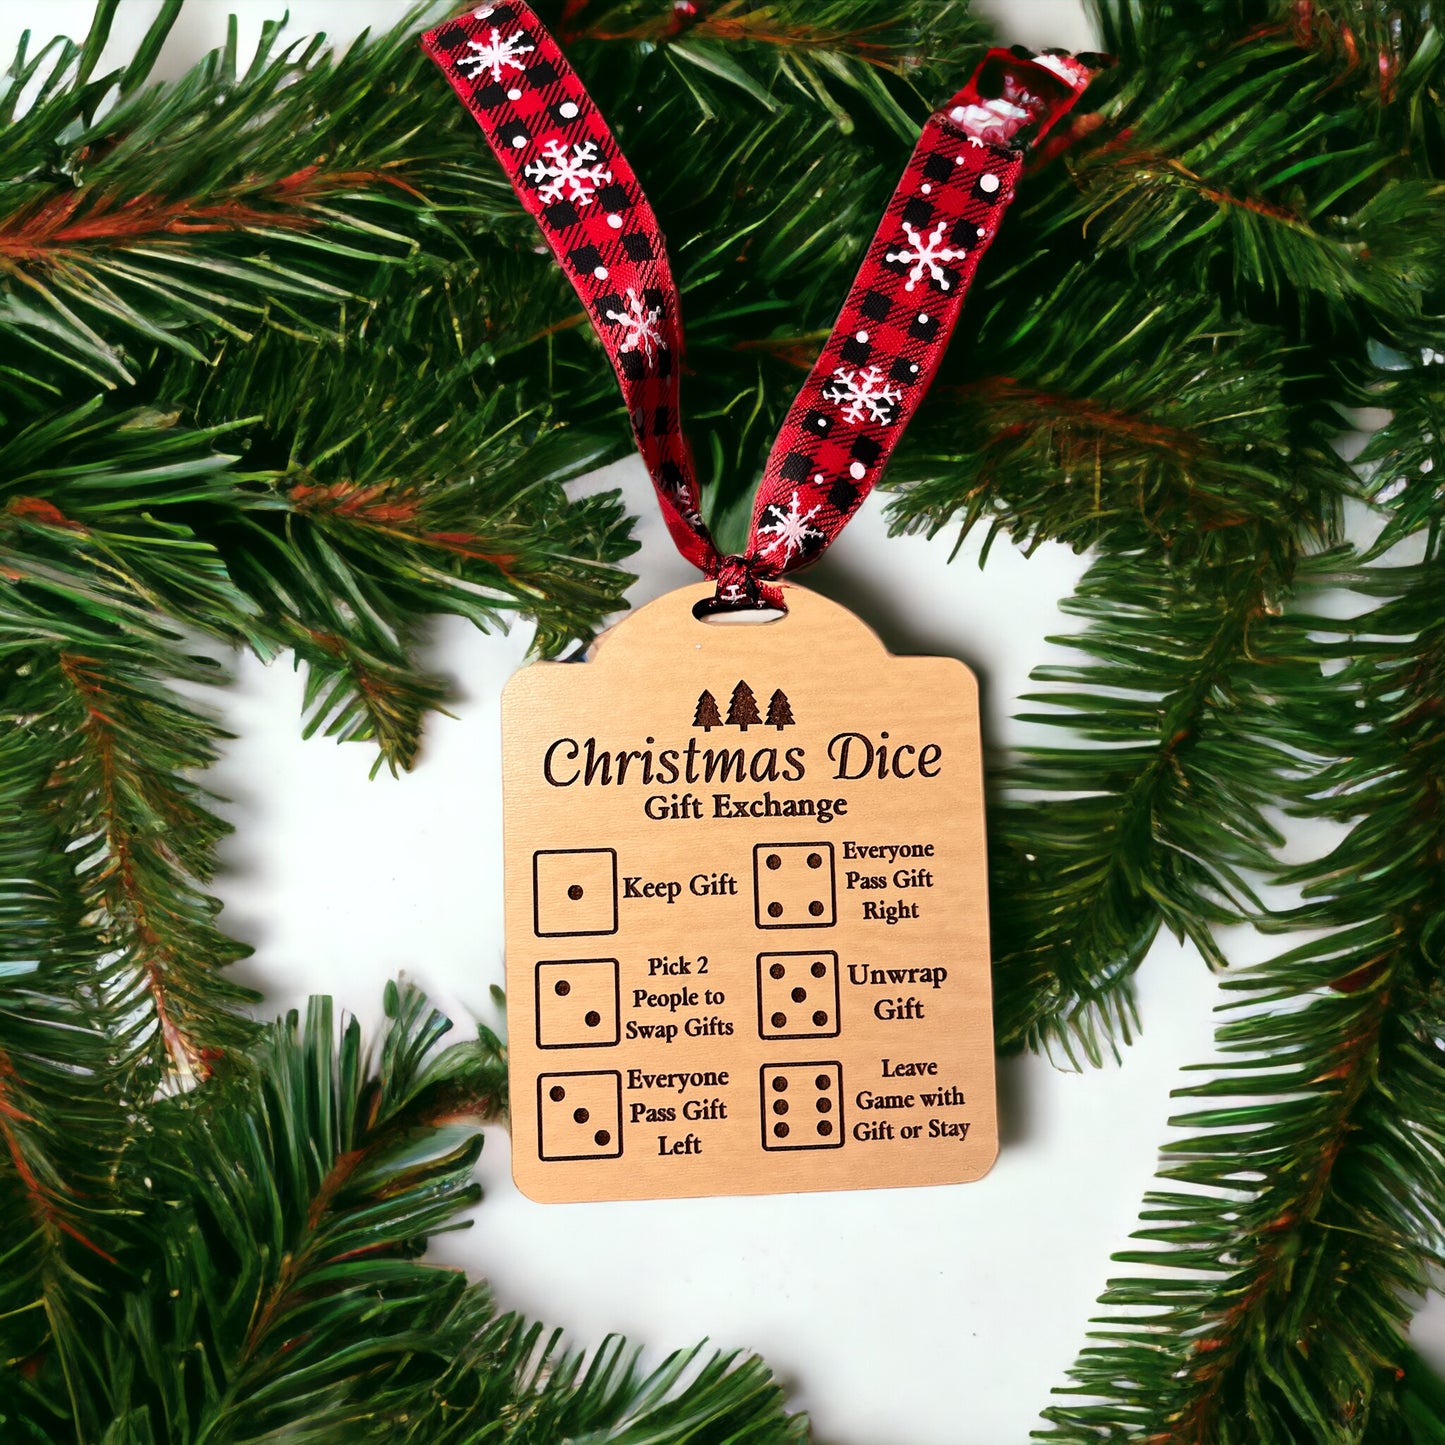 Christmas dice game instructions